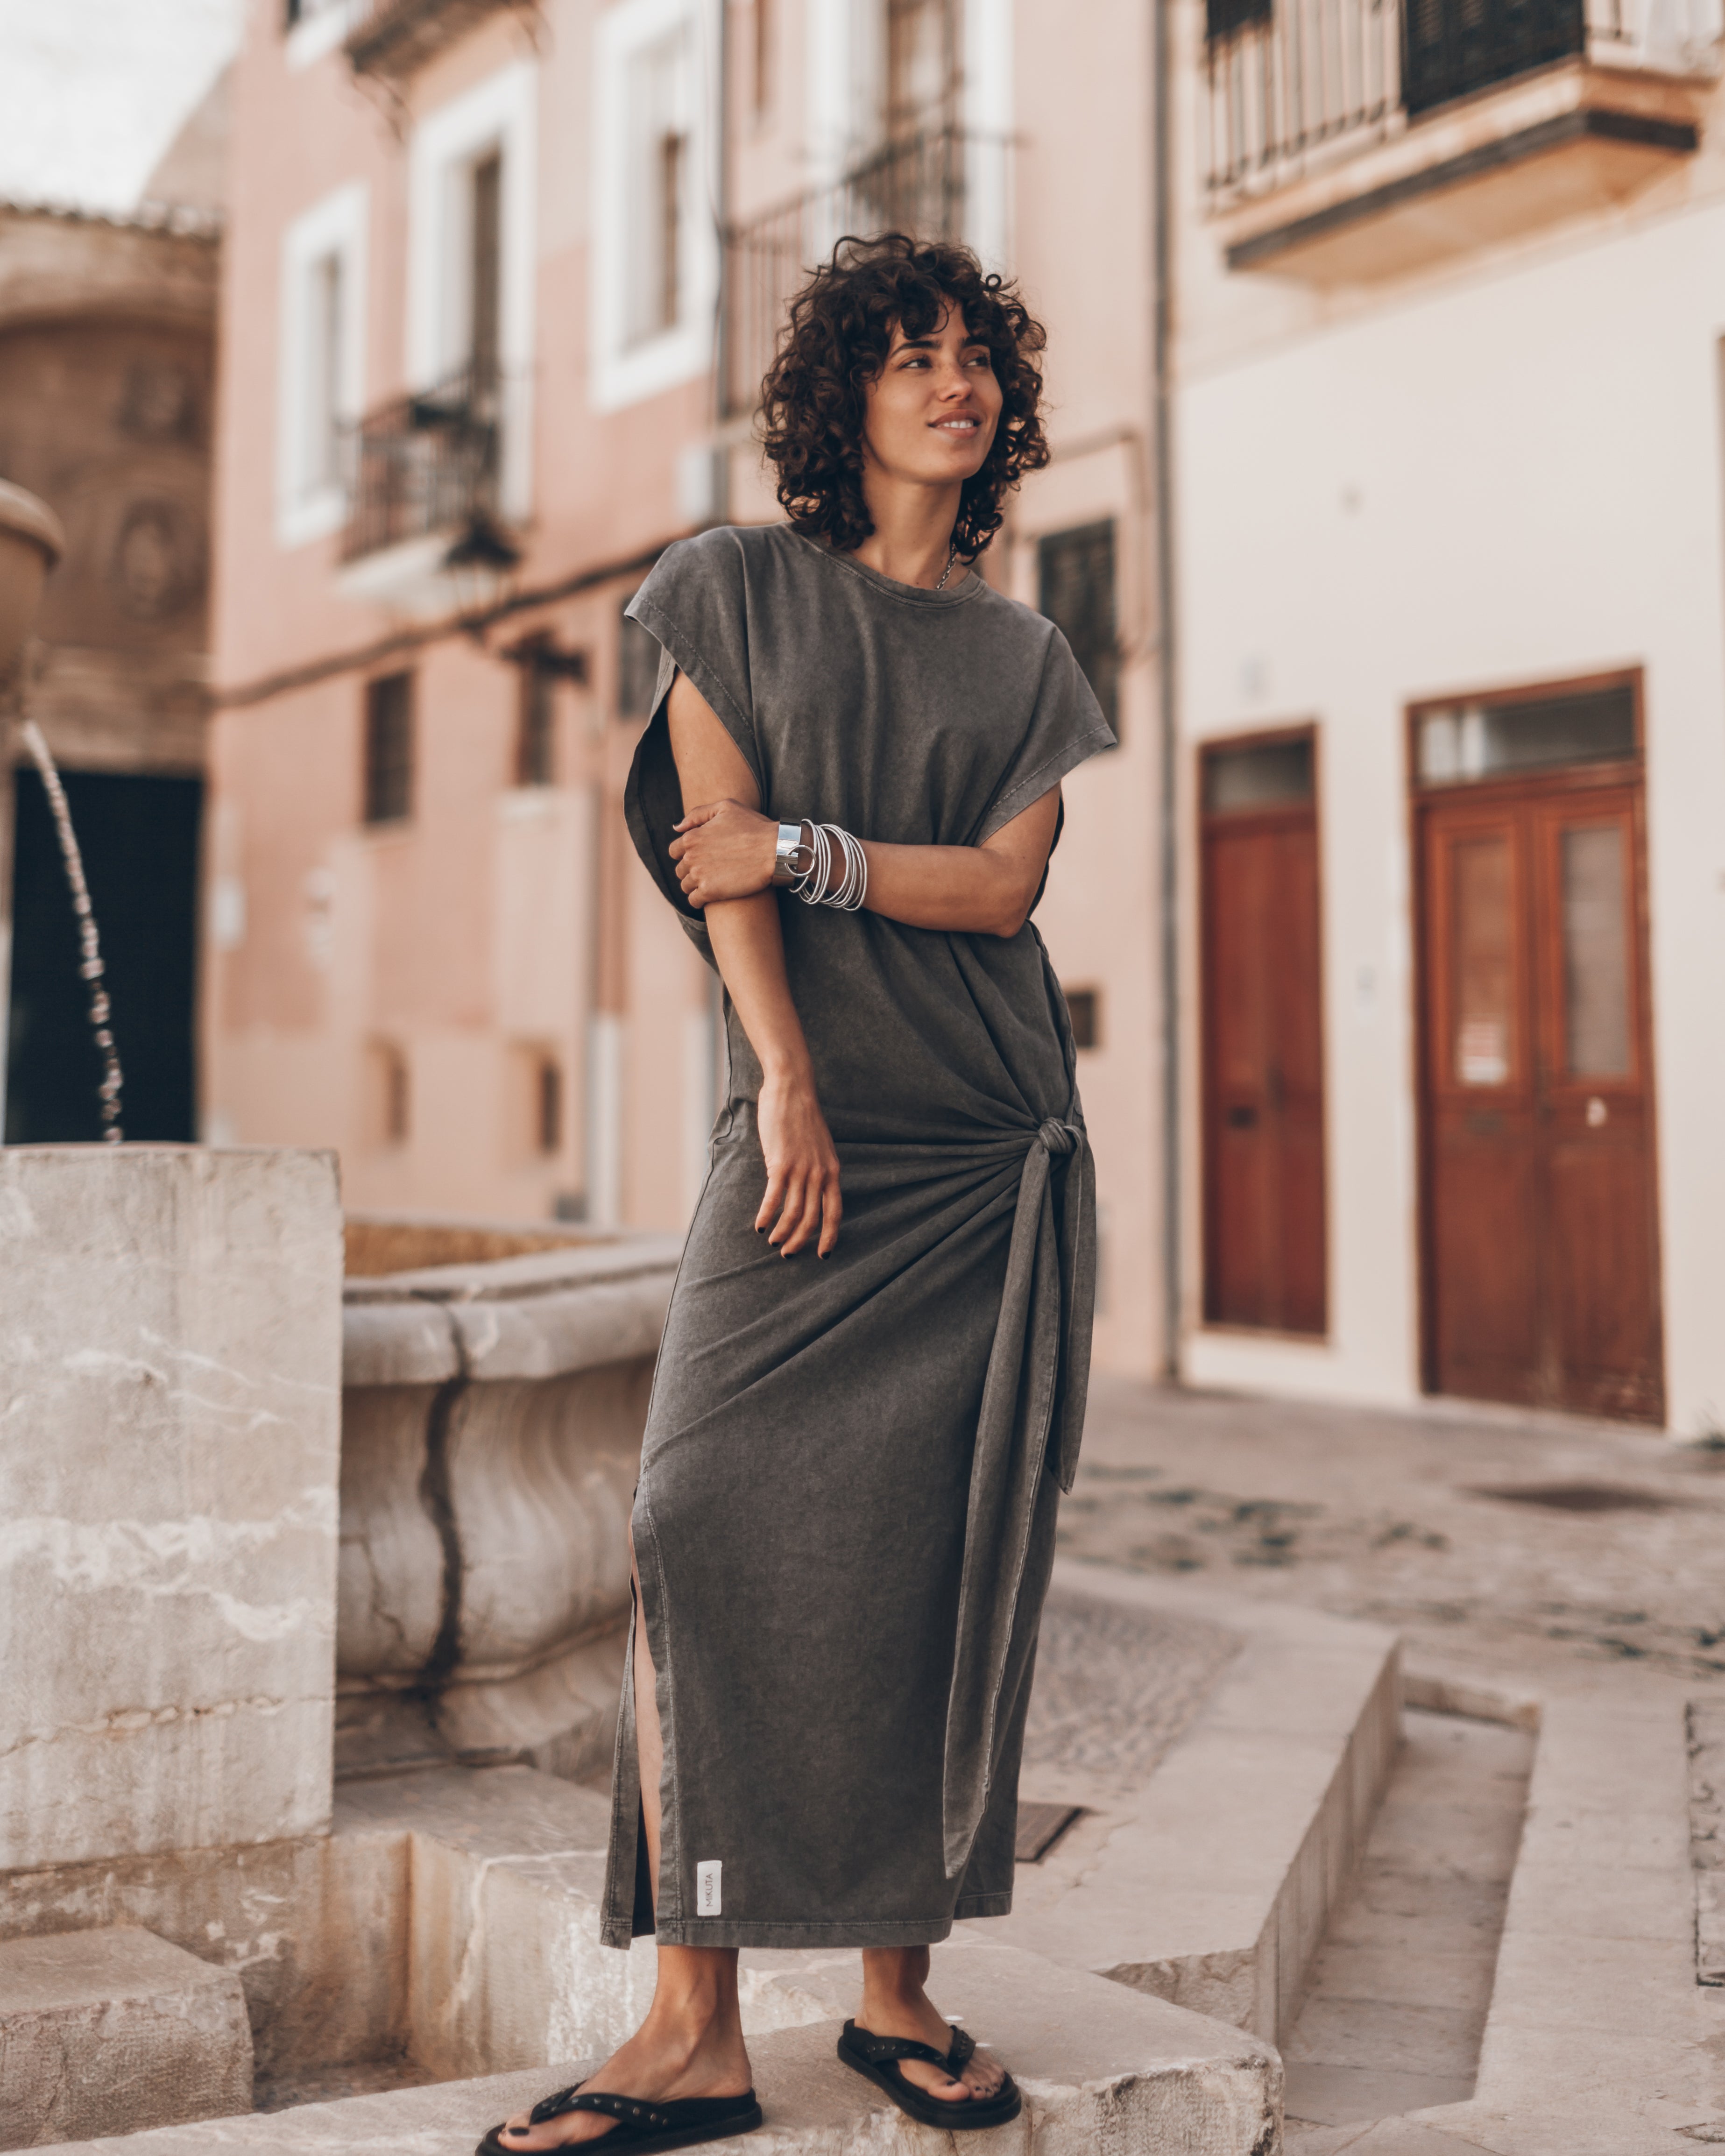 The Dark Faded Long Knotted Batwing Dress